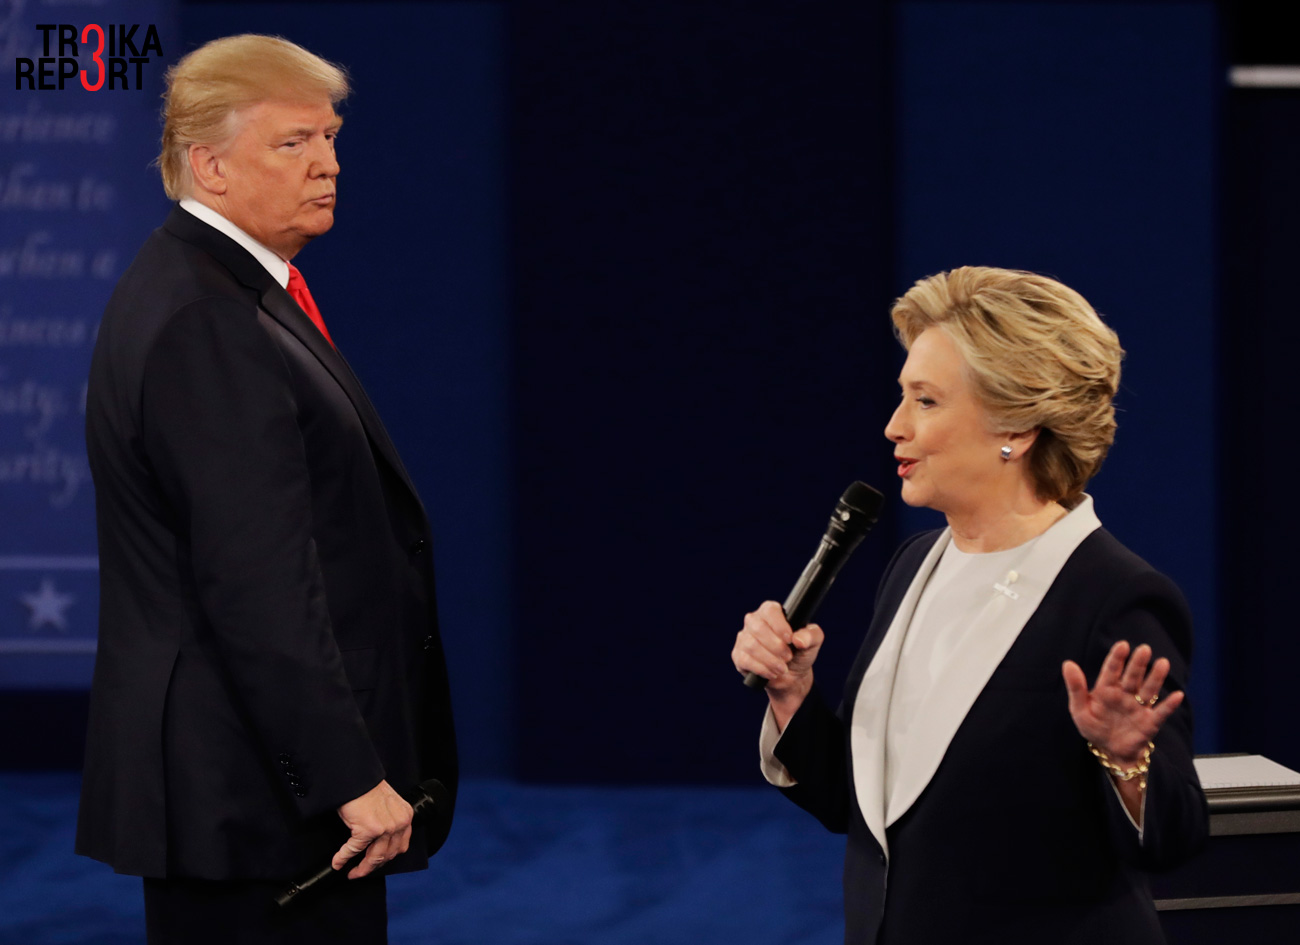 Republican presidential nominee Donald Trump listens to Democratic presidential nominee Hillary Clinton during the second presidential debate at Washington University in St. Louis.